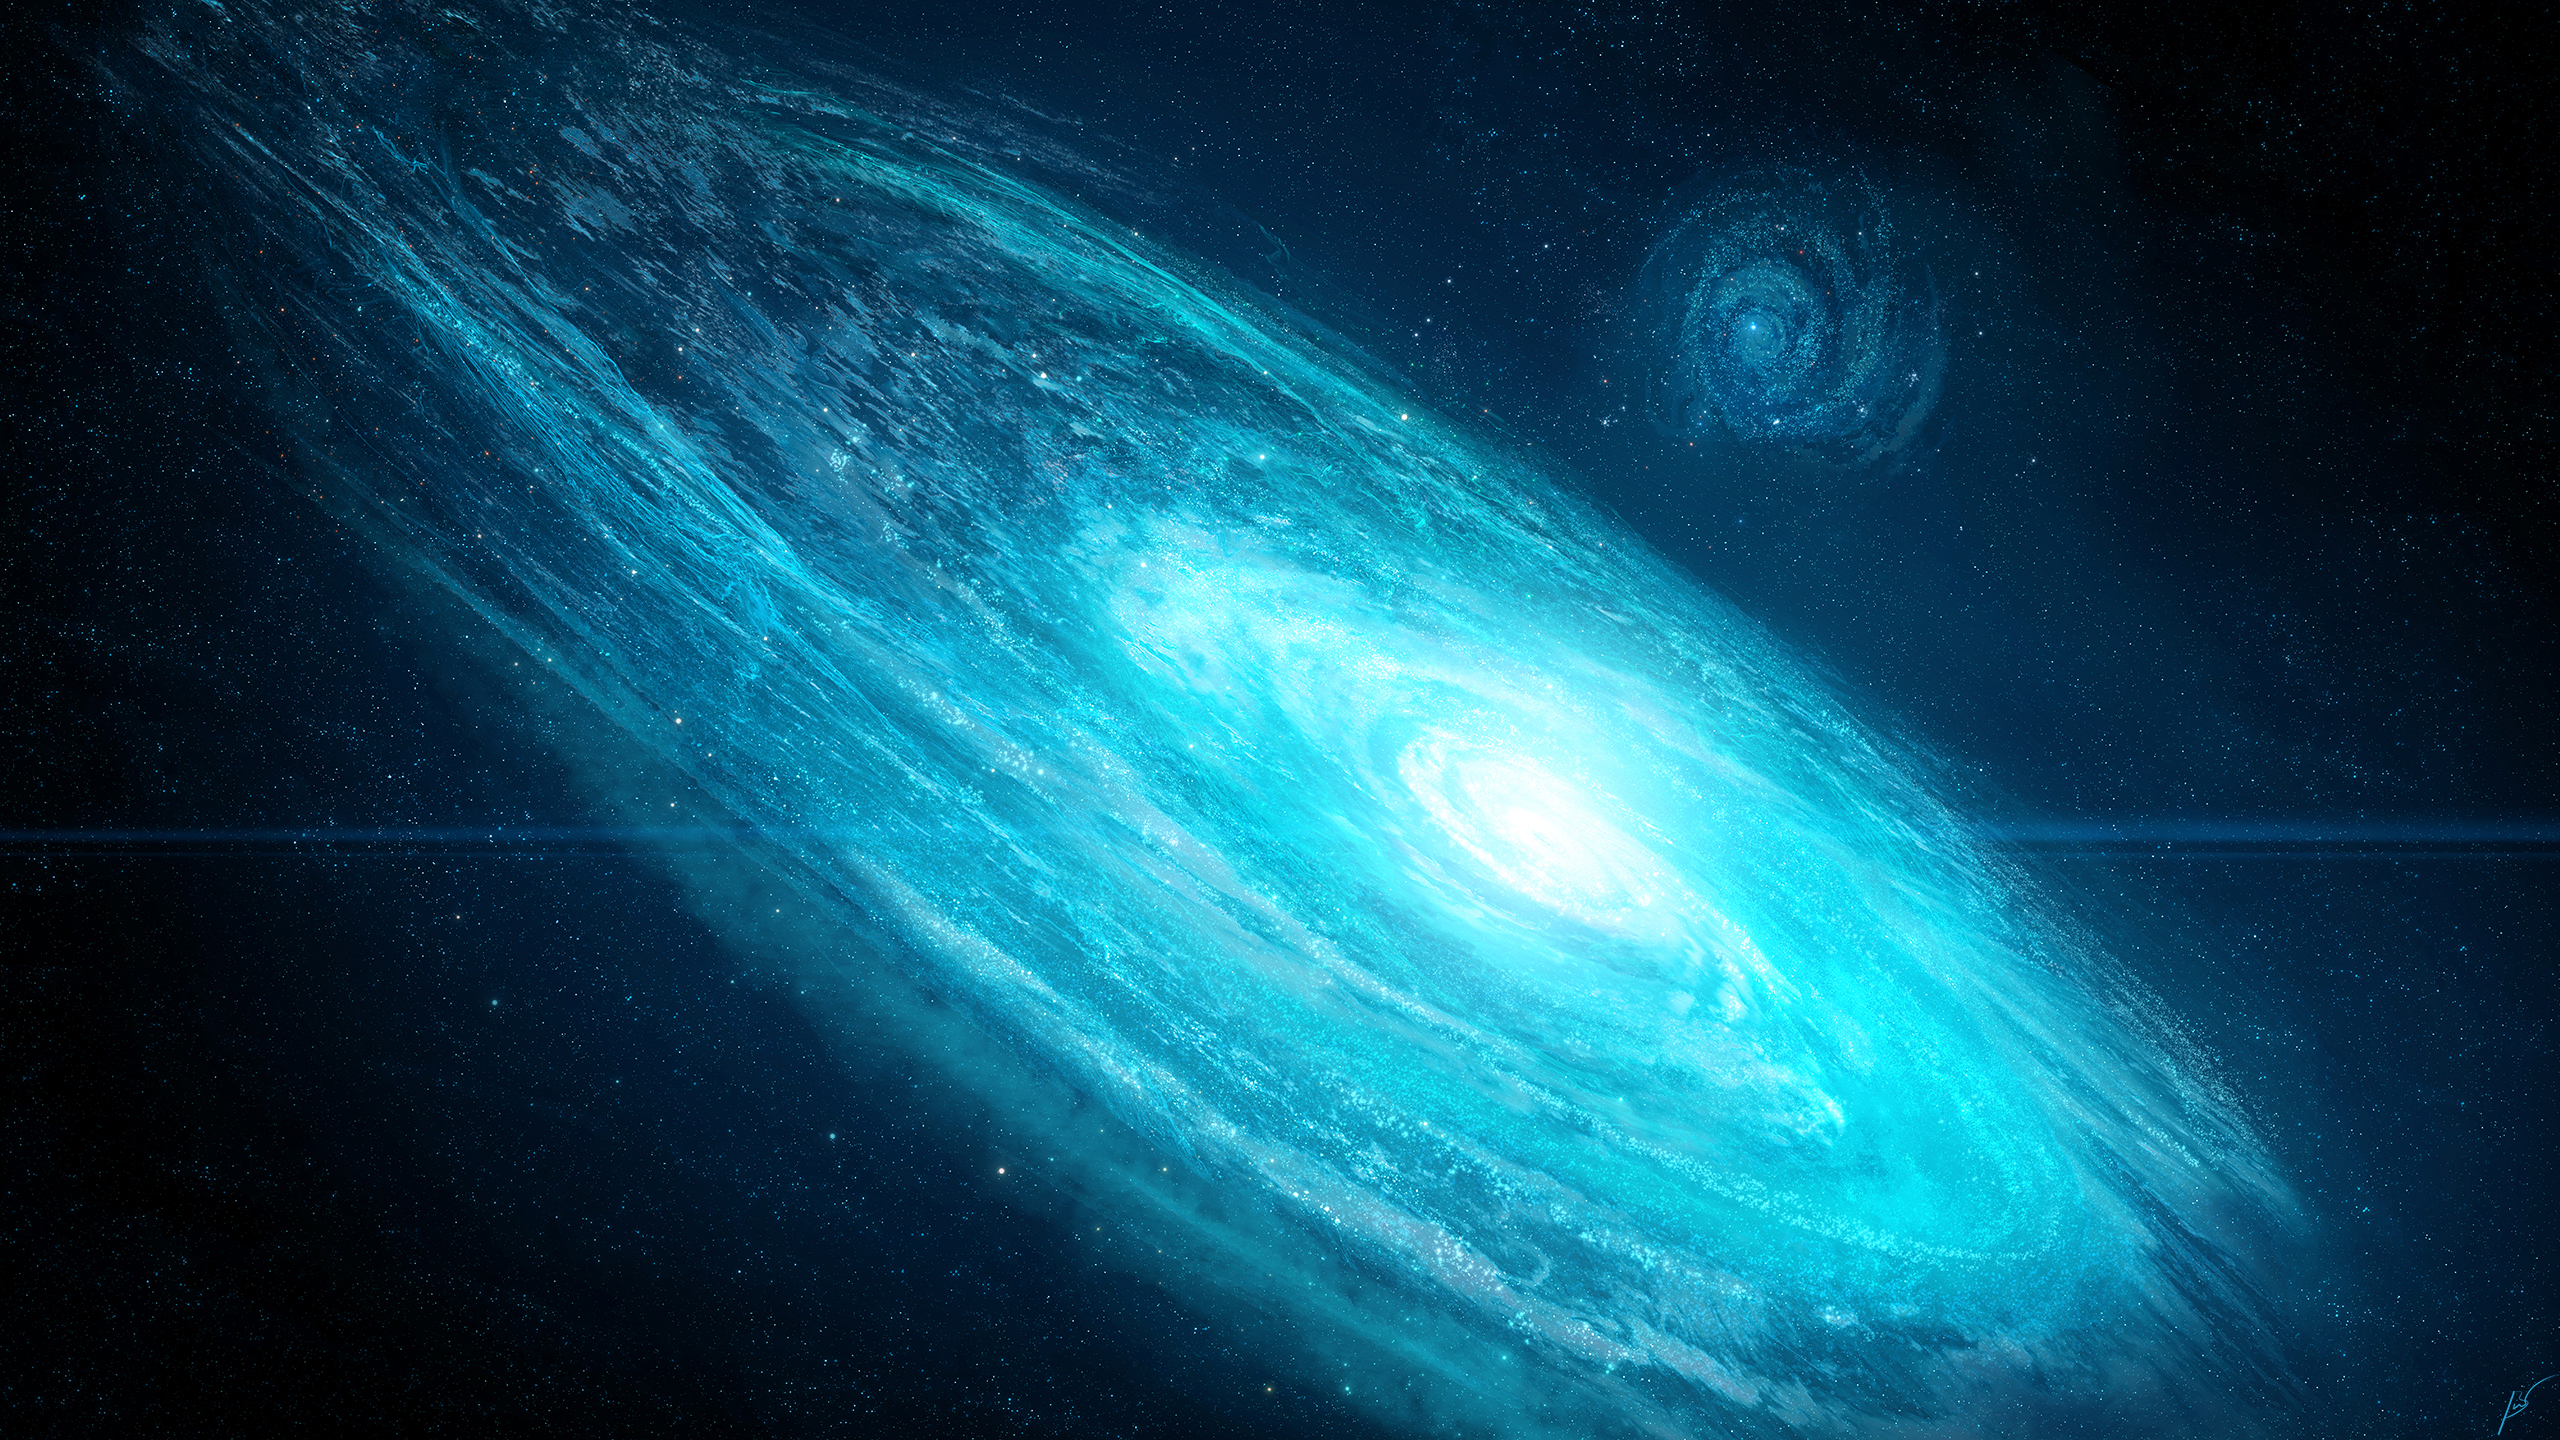 Sky With Bright Blue Galaxy With Wallpaper Of Black Sky 2K Galaxy